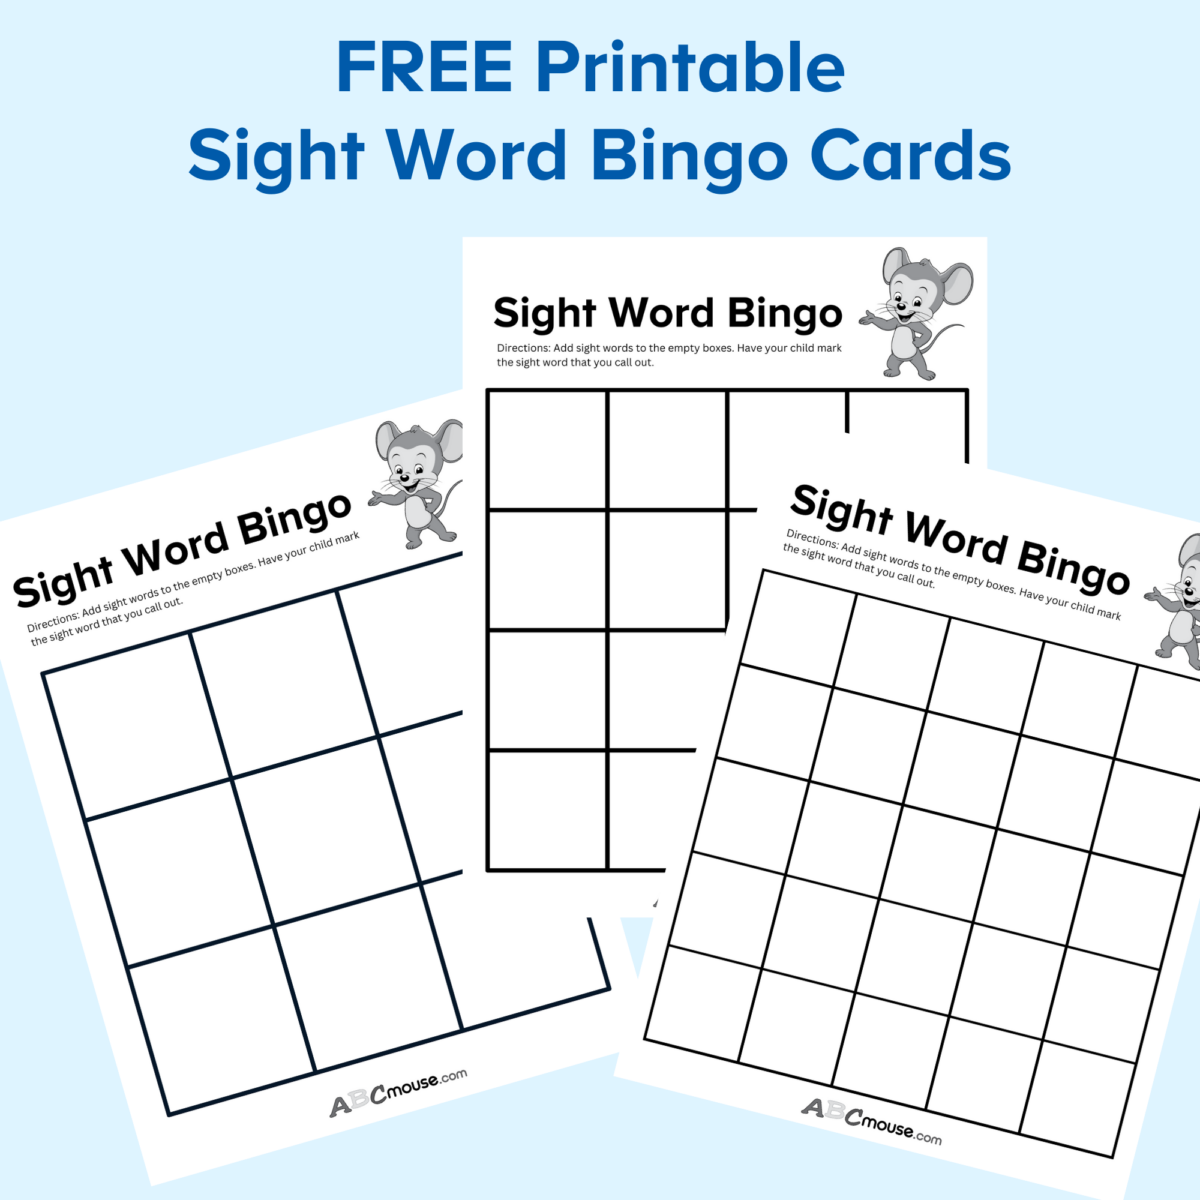 Free printable sight word bingo cards from ABCmouse.com